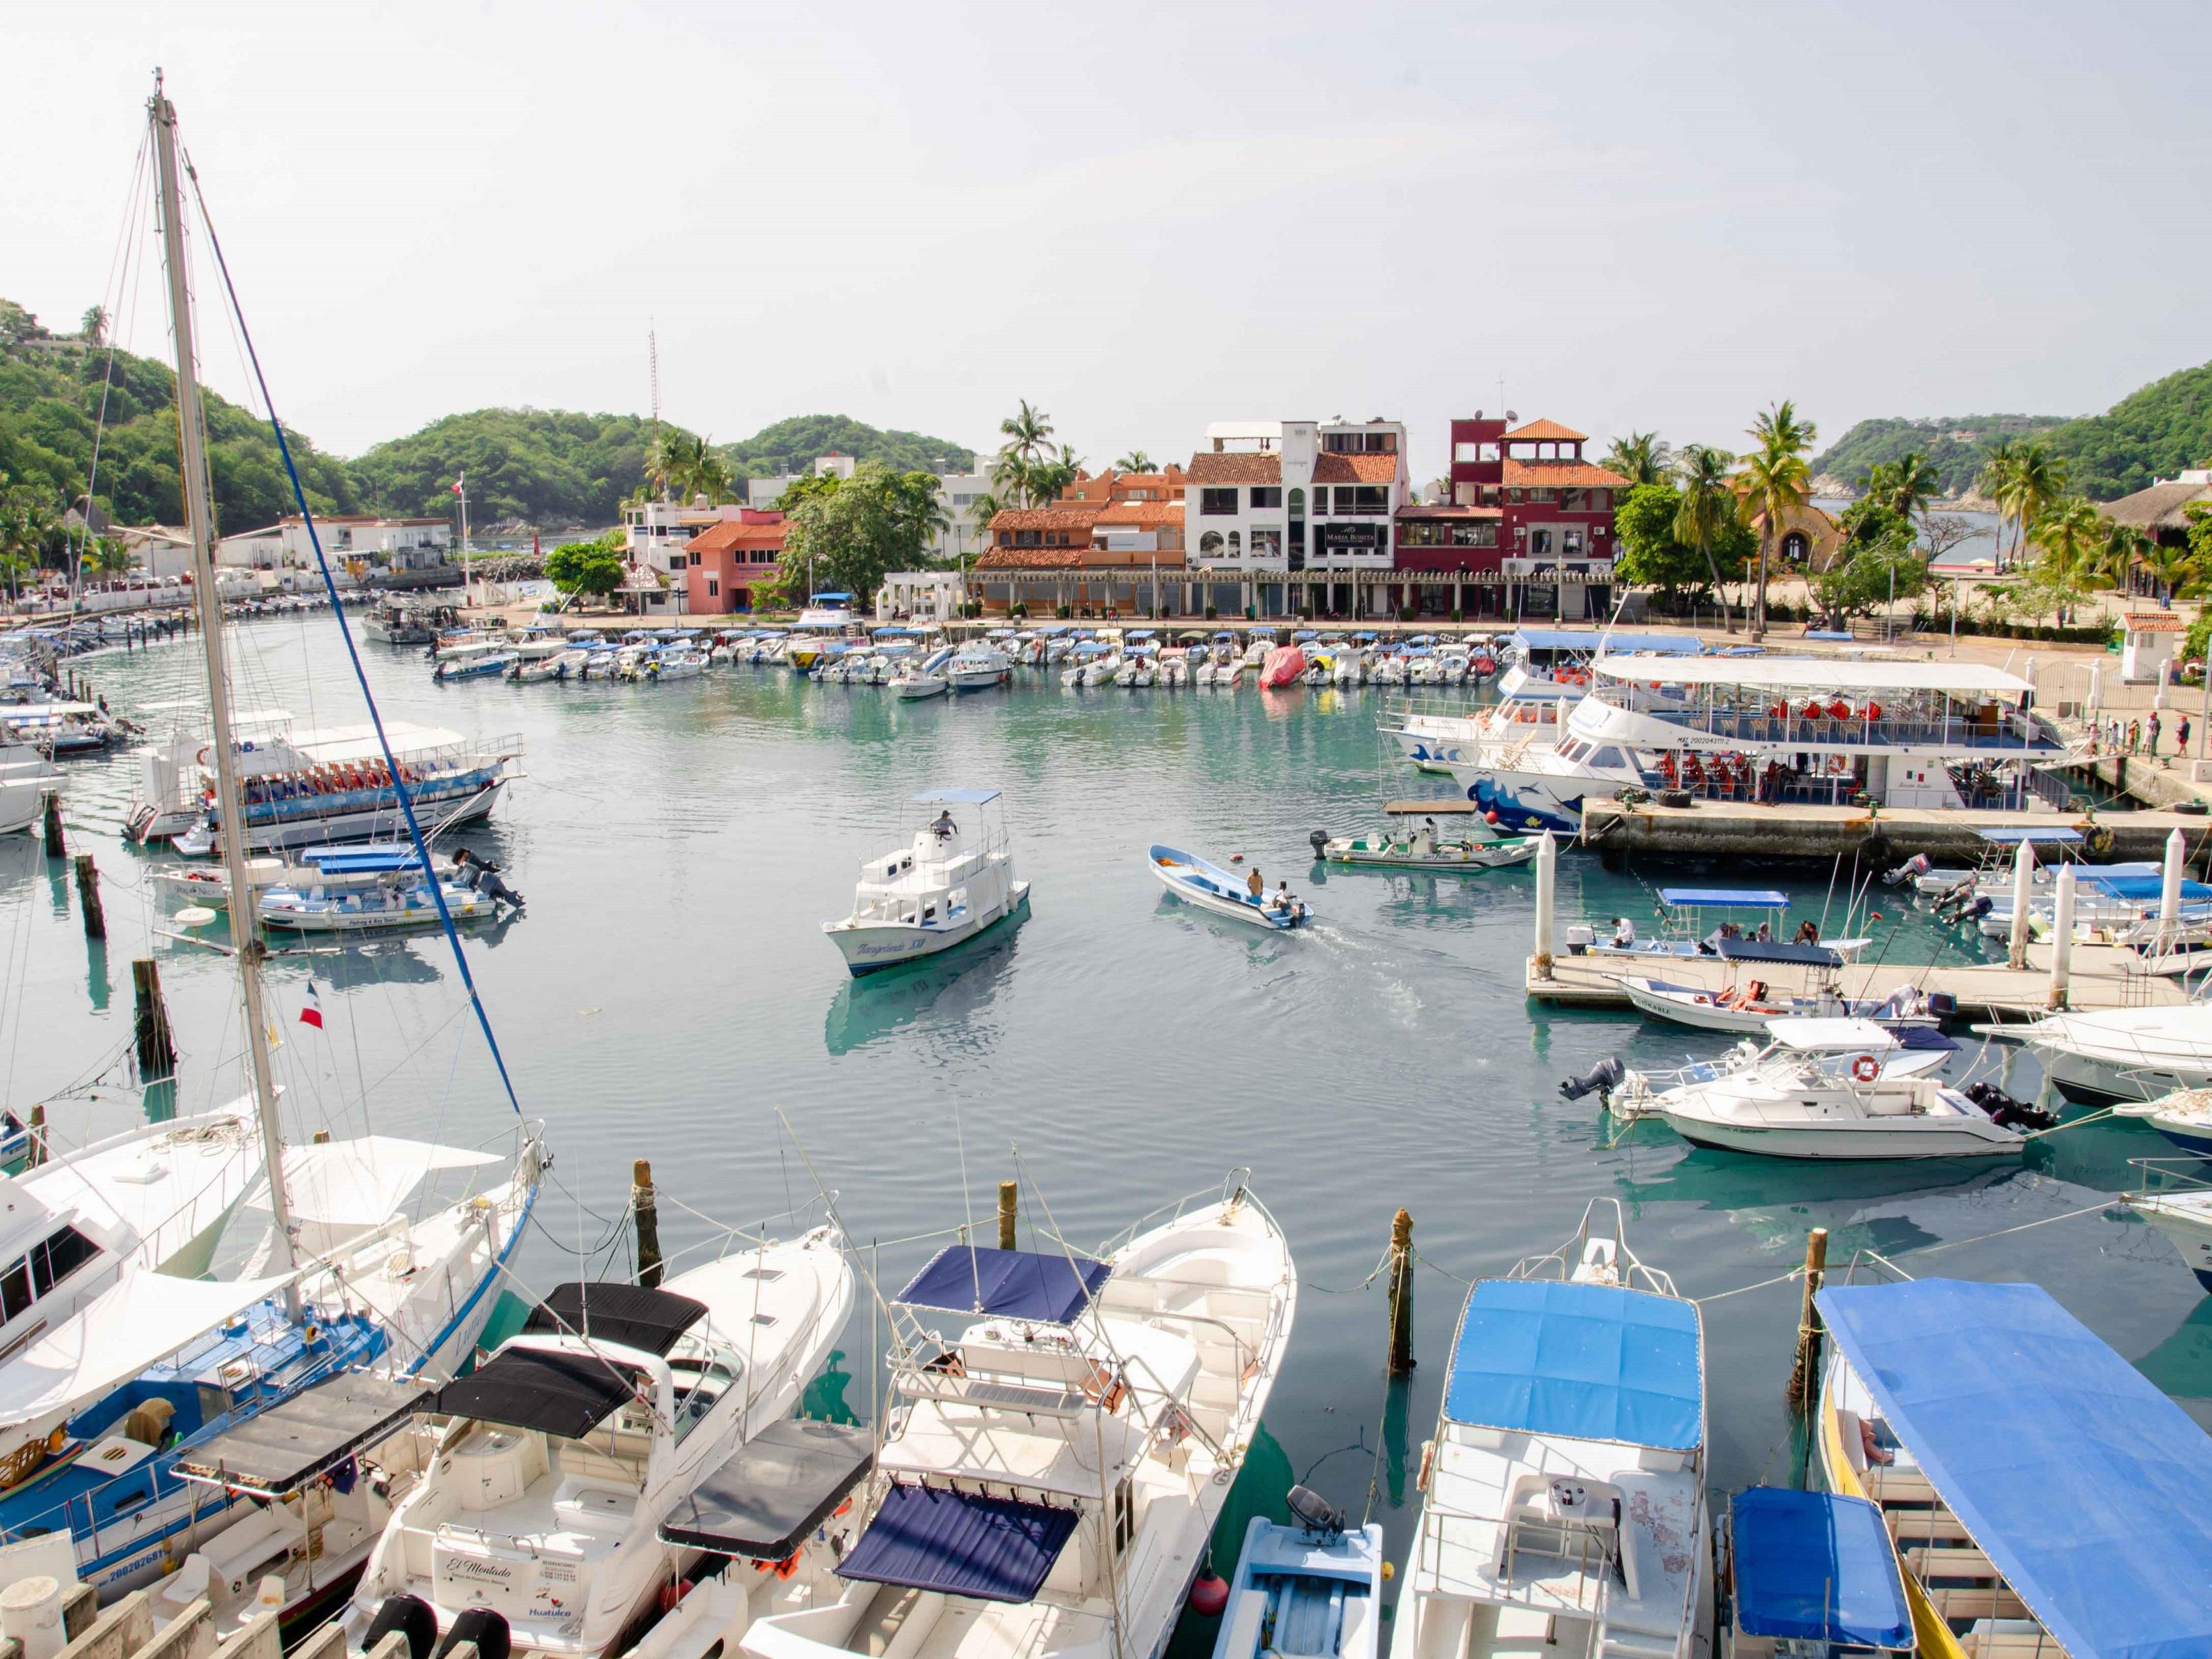 3 minute's walk from the hotel you will find the Santa Cruz Dock, which is where the boats depart for the famous tour to the bays.